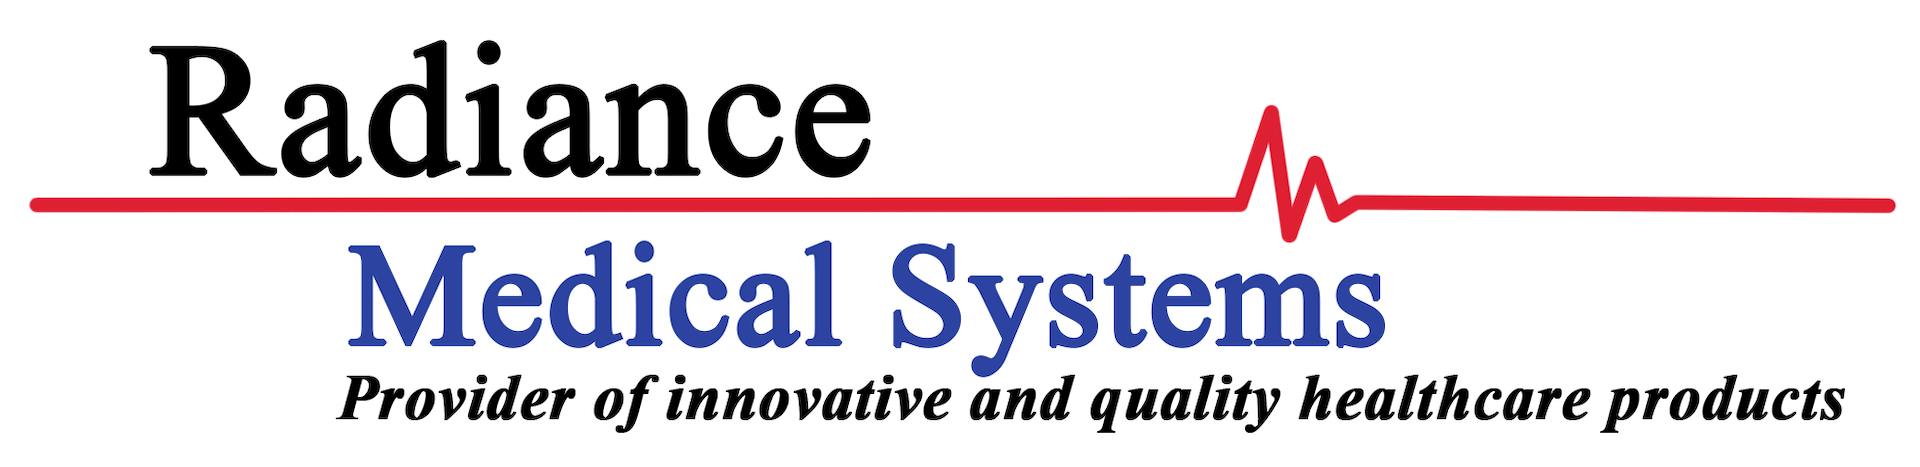 Radiance Medical Systems